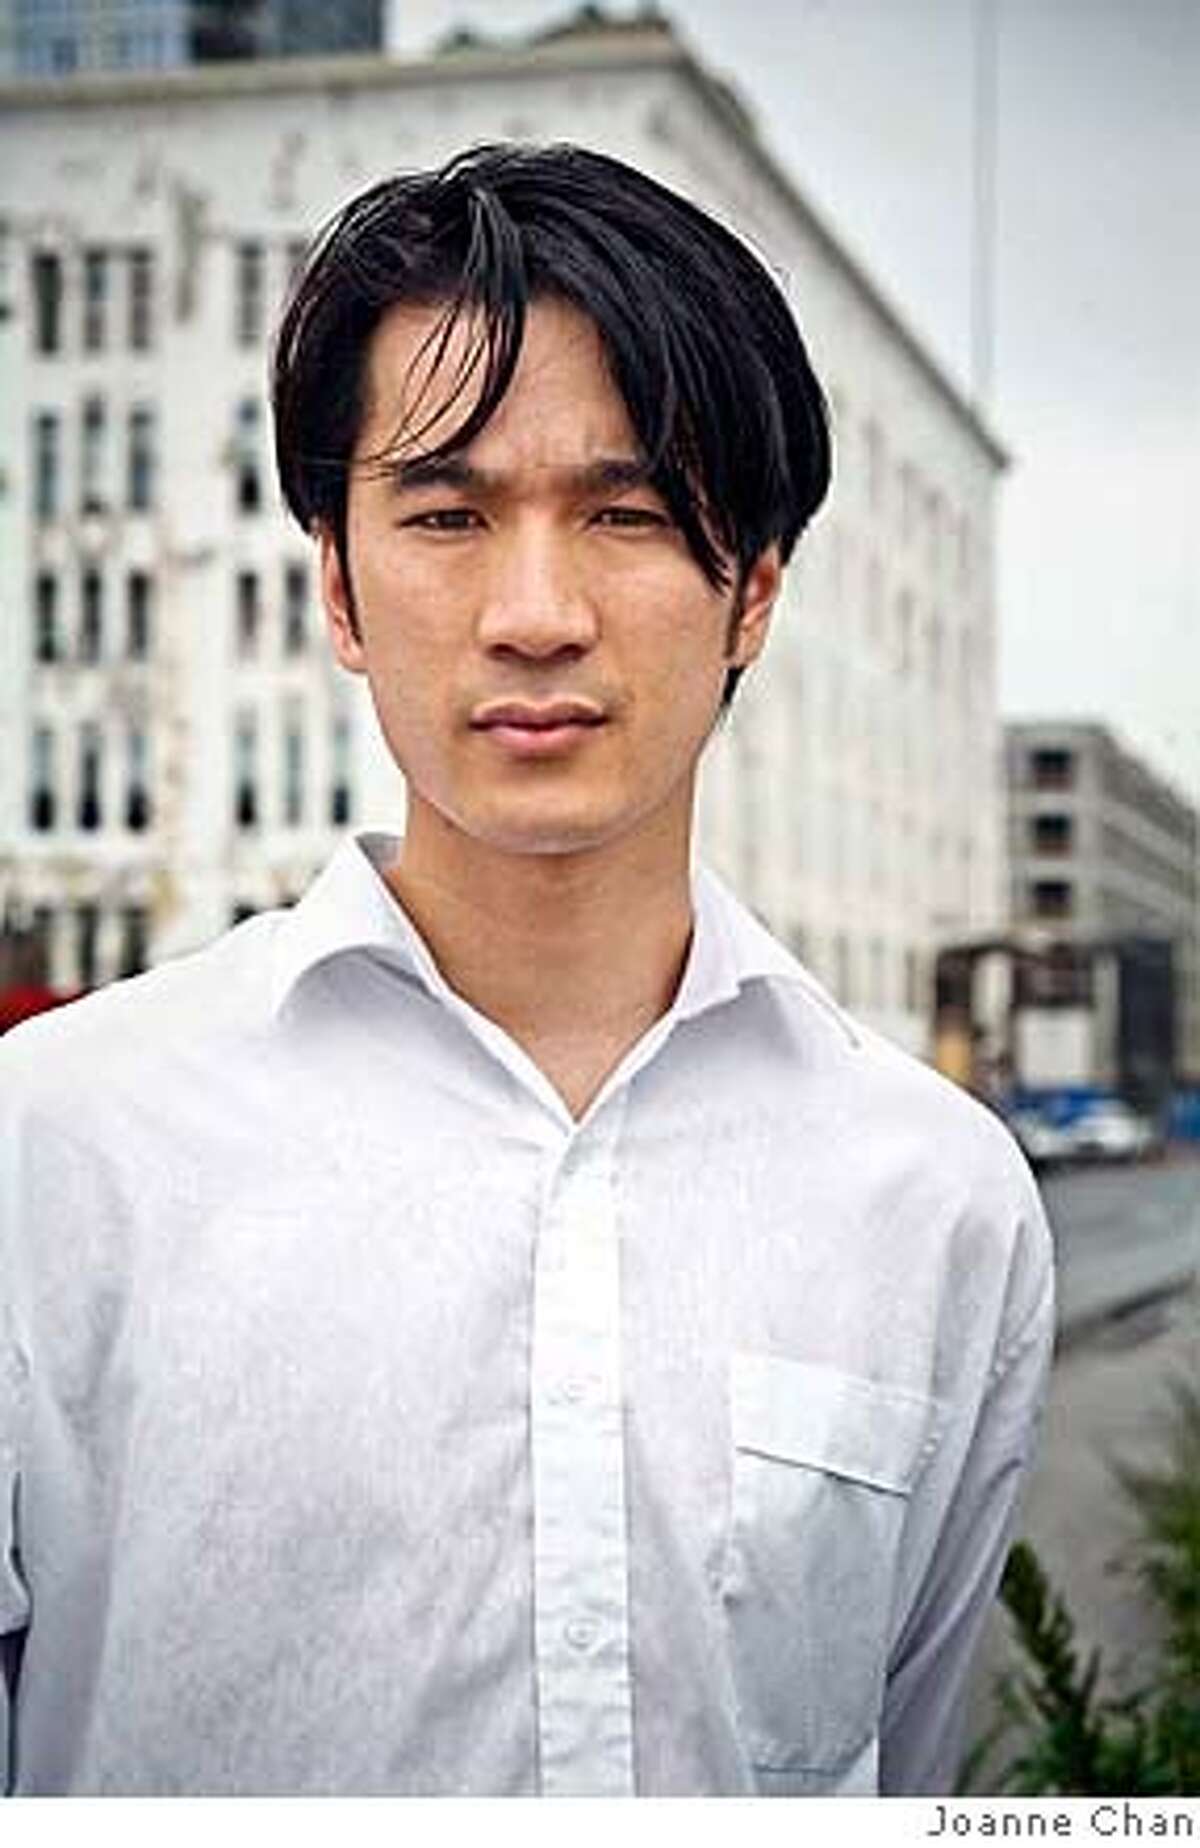 ###Live Caption:Nam Le, author of "The Boat" / Credit: Joanne Chan / FOR USE WITH BOOK REVIEW ONLY###Caption History:Nam Le, author of "The Boat" / Credit: Joanne Chan / FOR USE WITH BOOK REVIEW ONLY###Notes:###Special Instructions: